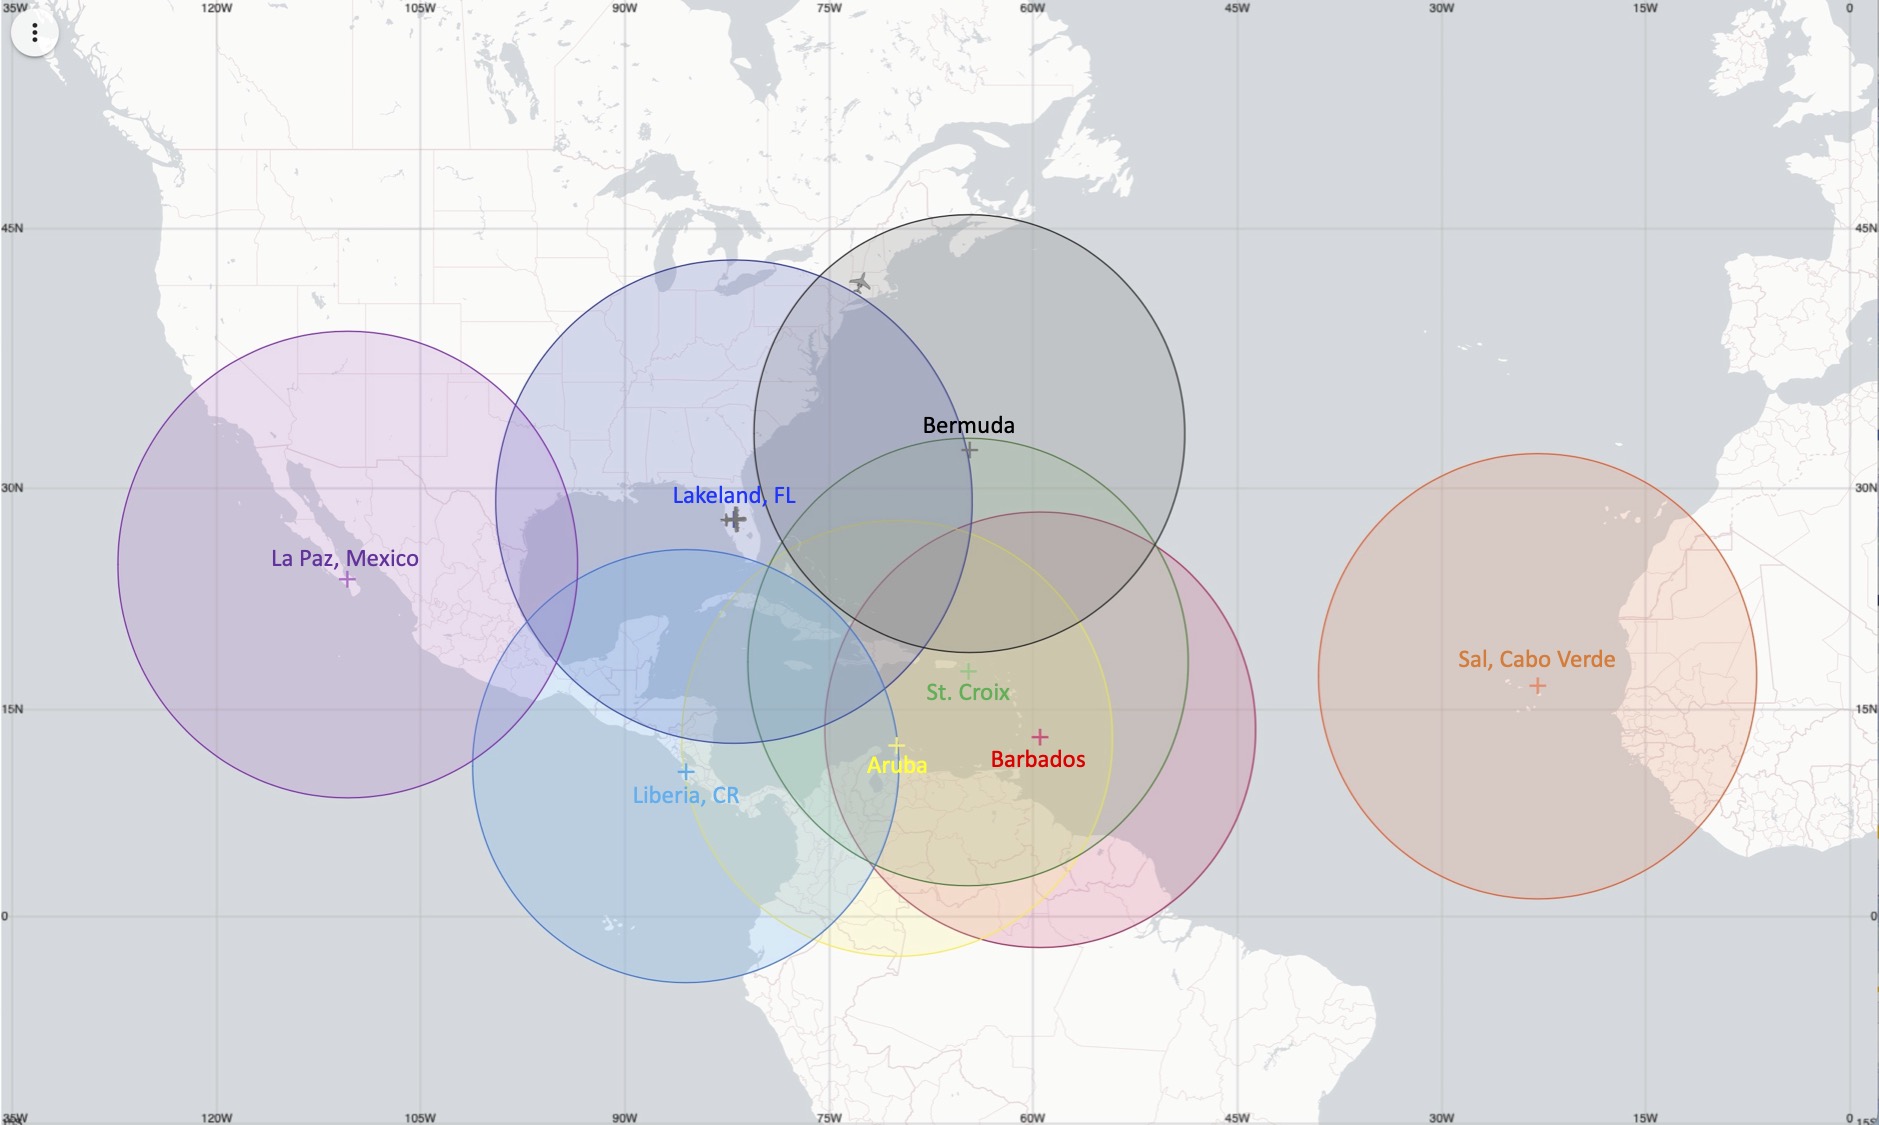 2023 Hurricane Filed Program Operational Flight Map of The P-3 Aircraft Depicts 8 circles indicating aircraft range, centered on La Paz, Mexico; Lakeland, FL; Bermuda; Liberia Costa Rica; Aruba; St Croix; Barbados & Sal, Cabo Verde. The circles are somewhat smaller than those of the GIV